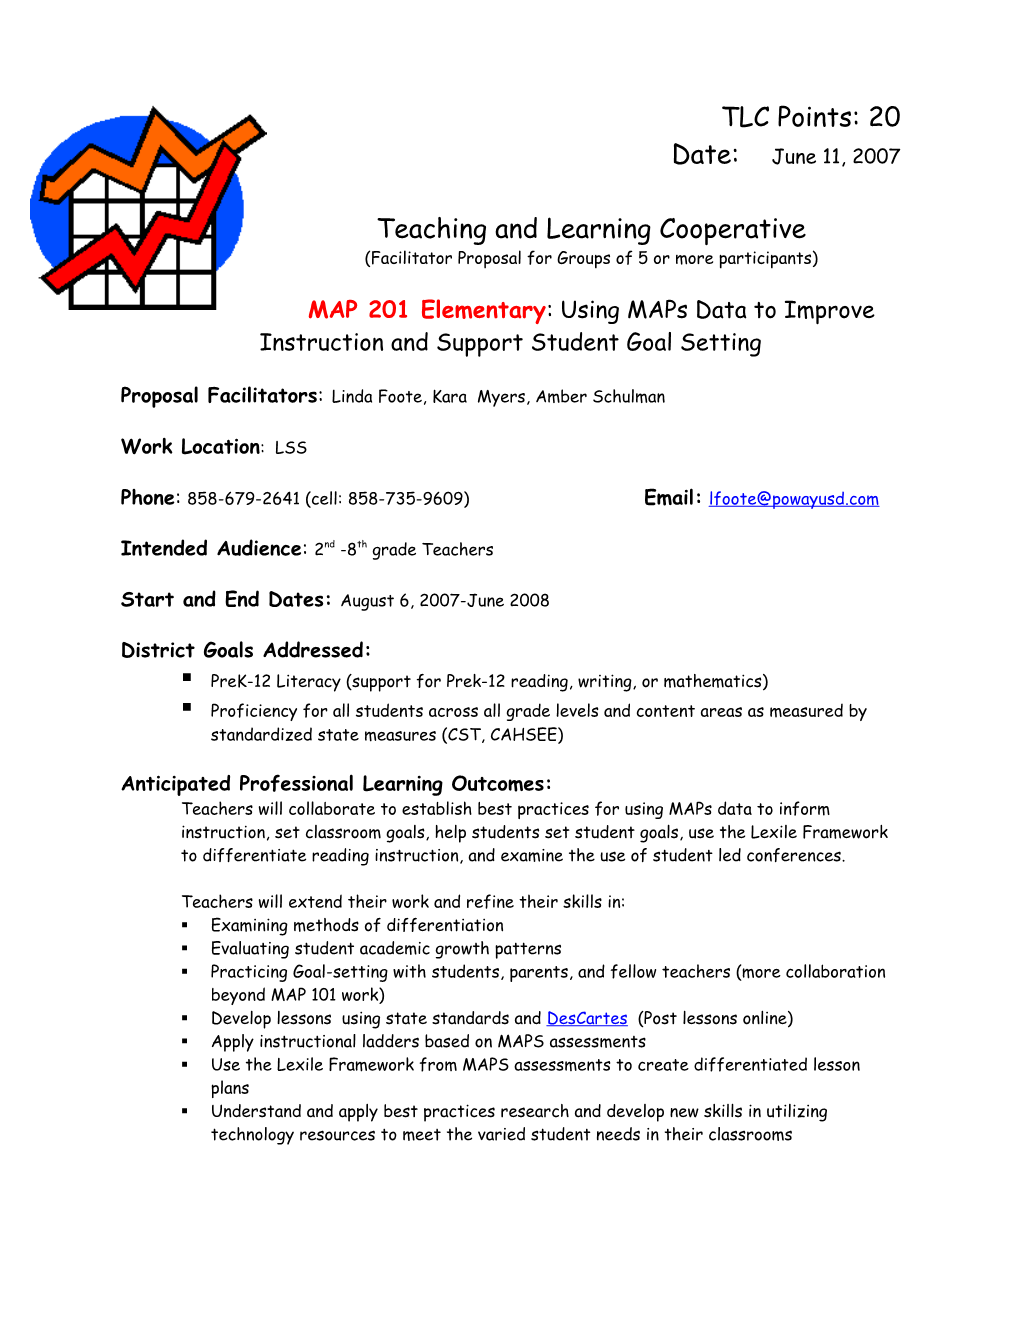 Teaching and Learning Cooperative